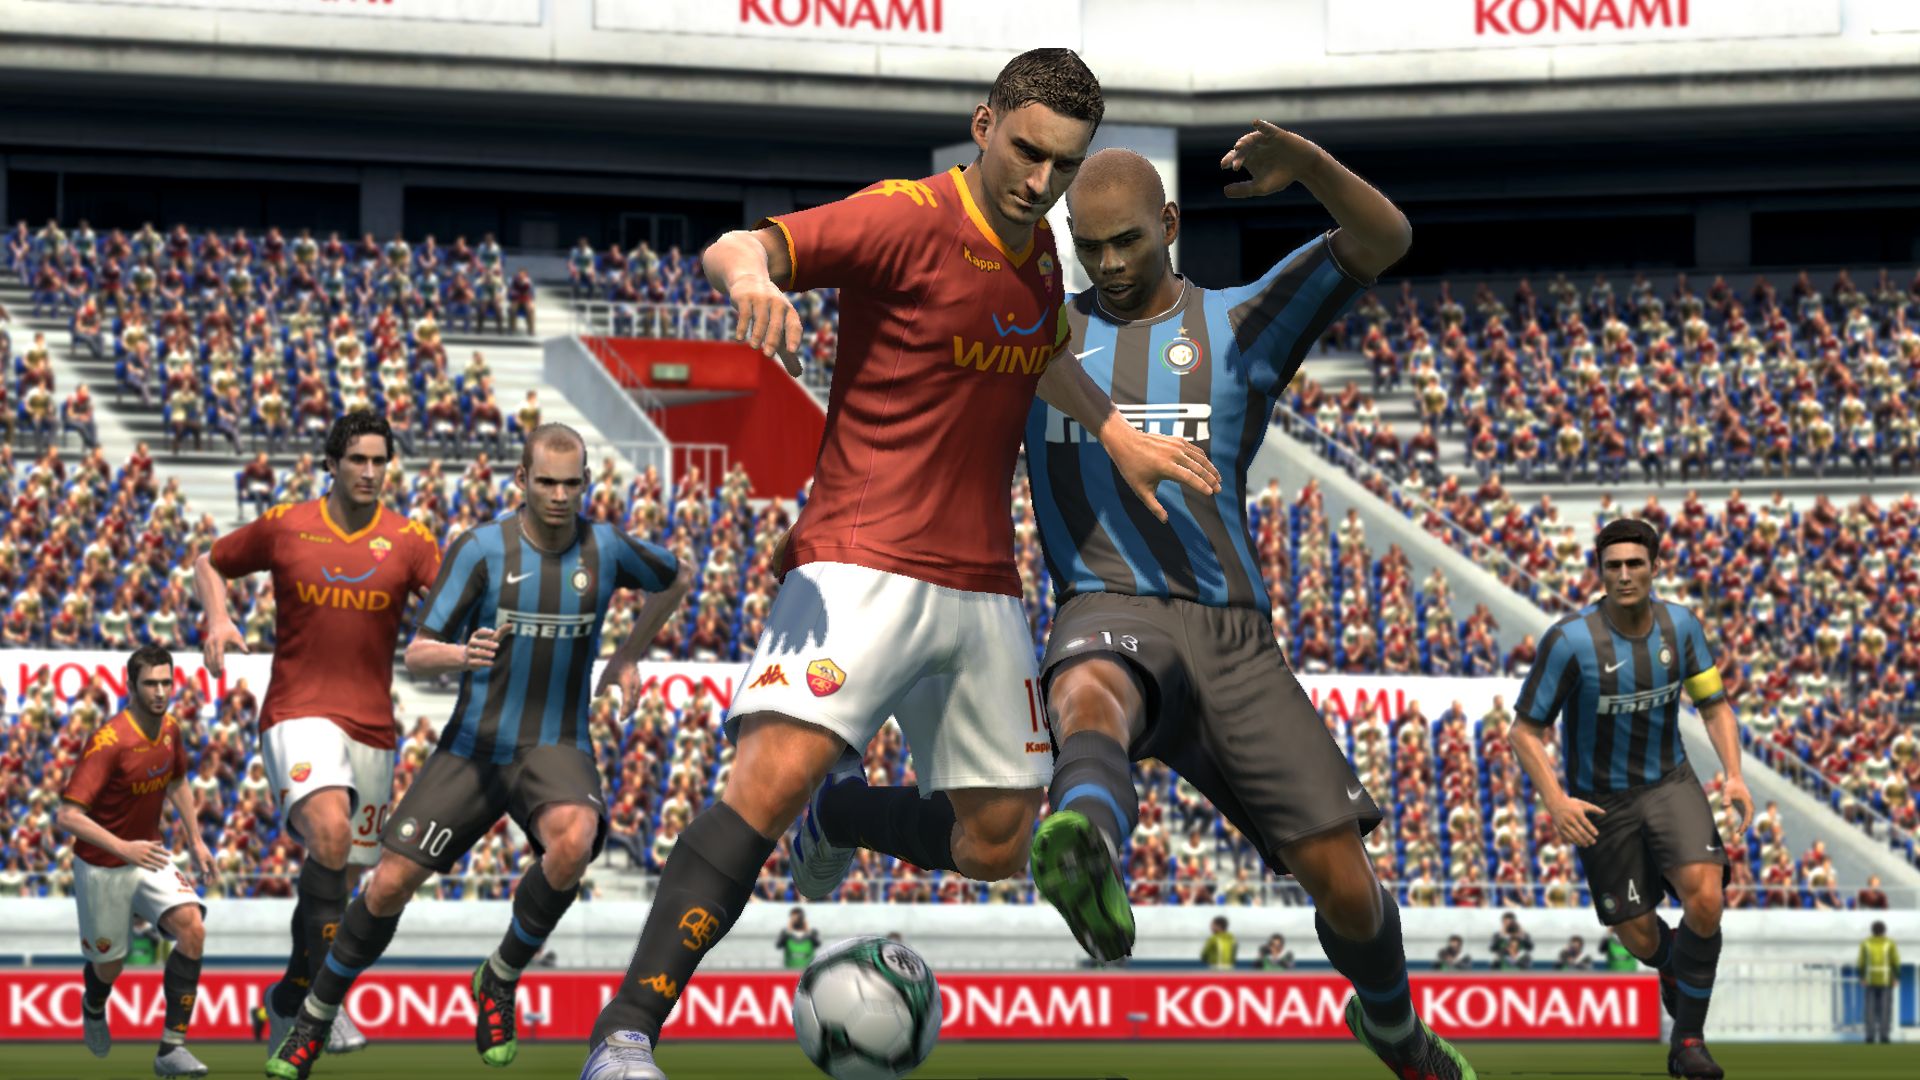 PES 2011 images - Image #2609